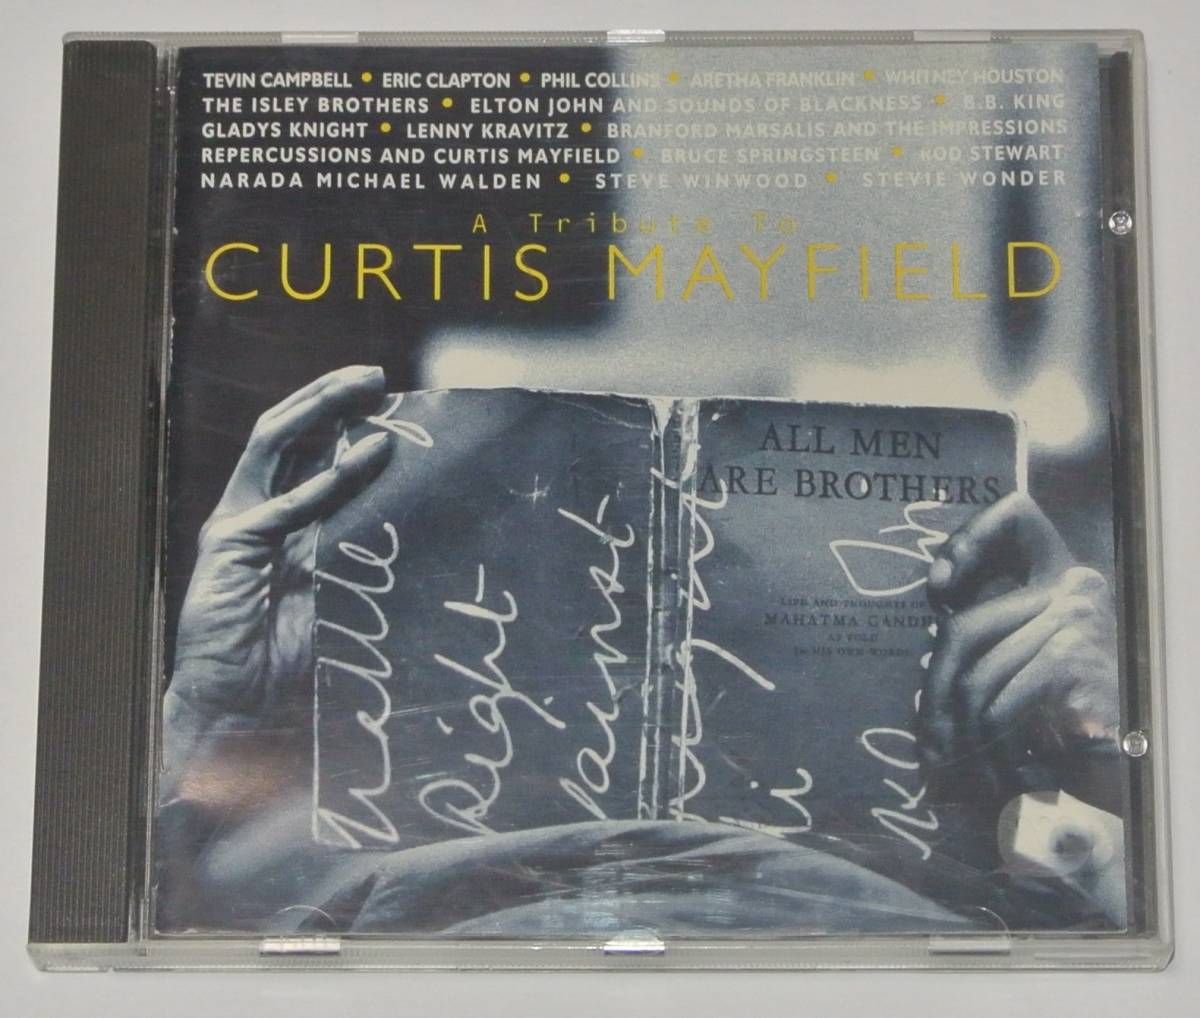 ☆A TRIBUTE TO CURTIS MAYFIELD カーティス・メイフィールド ③☆_画像1